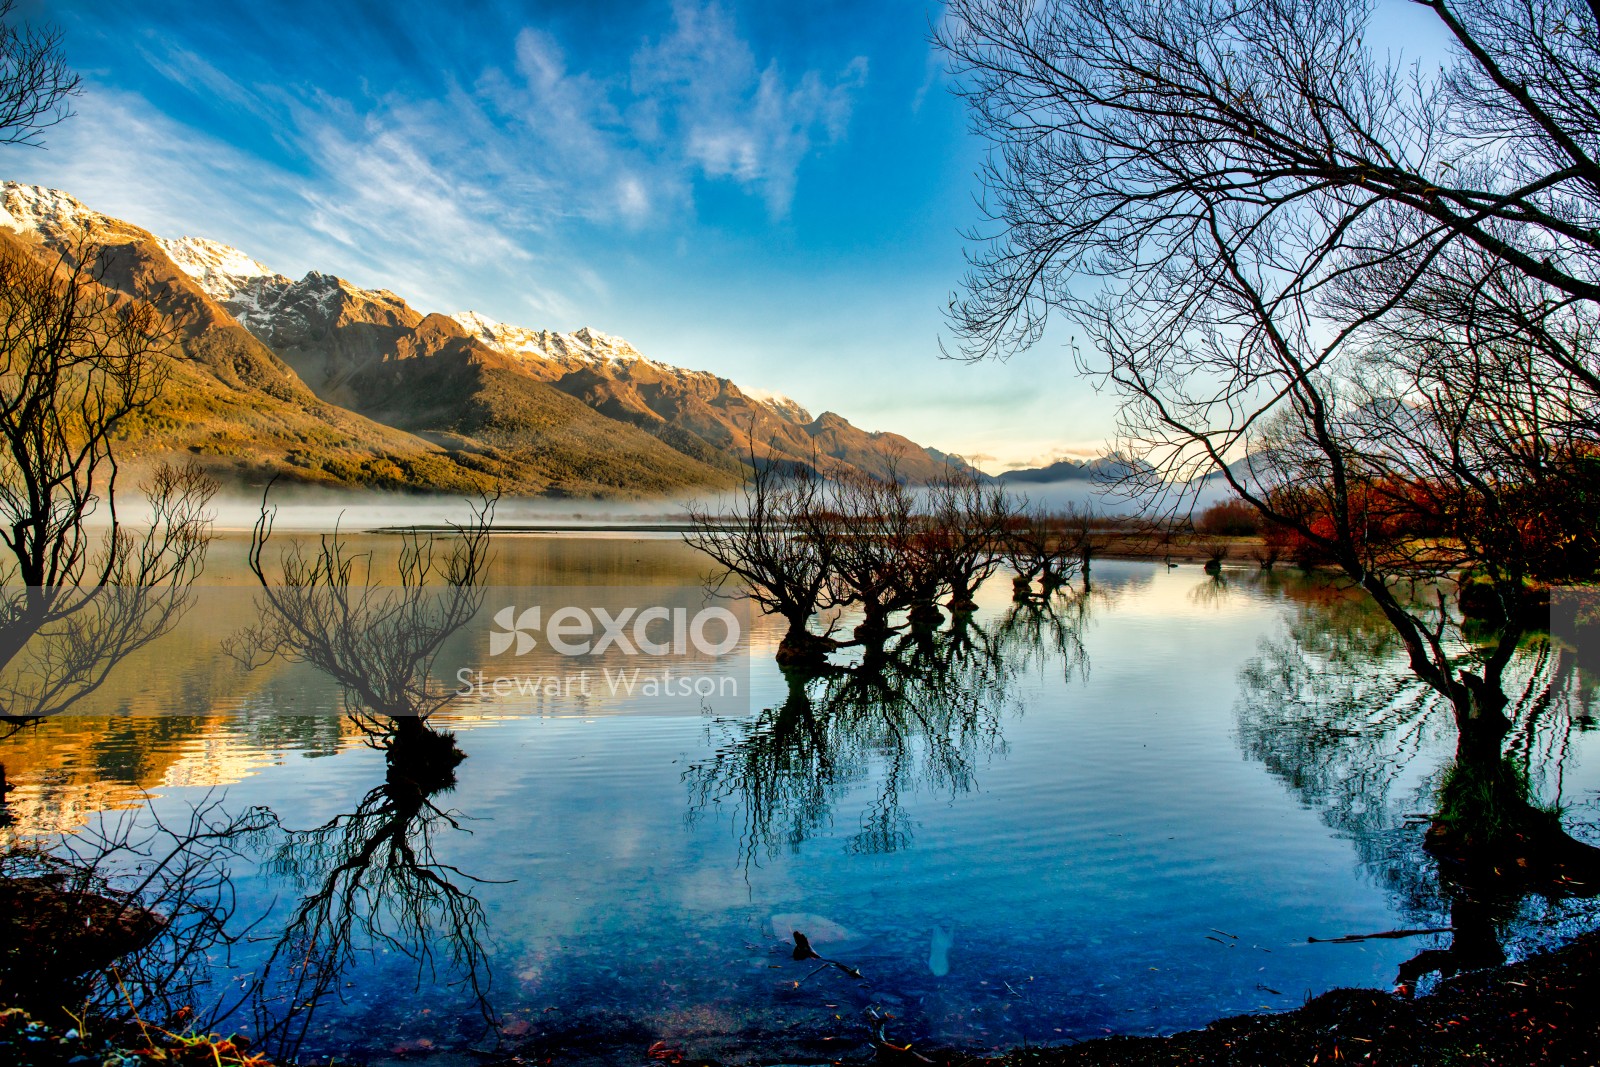 Glenorchy willows